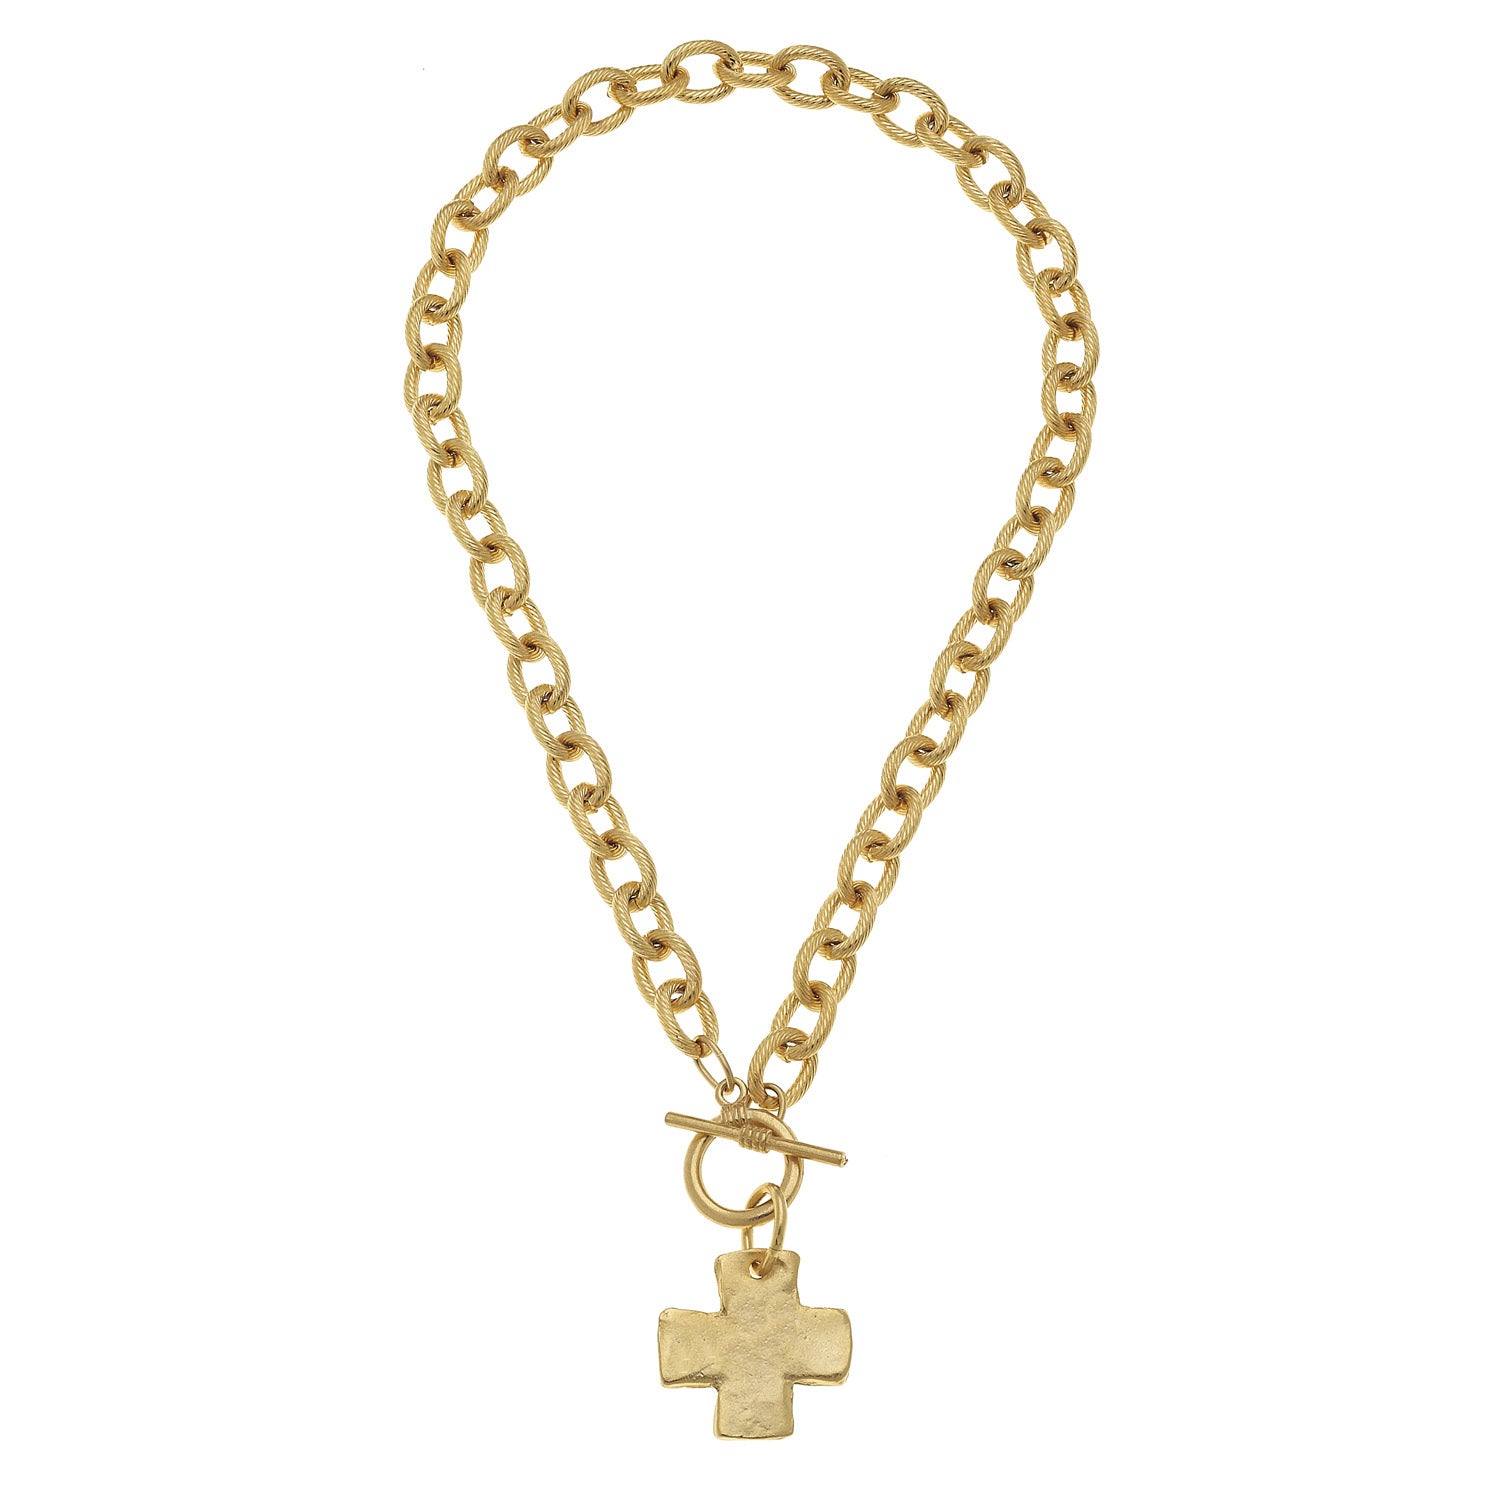 Susan Shaw Cross Chain Toggle Necklace, Gold Plated Pendant